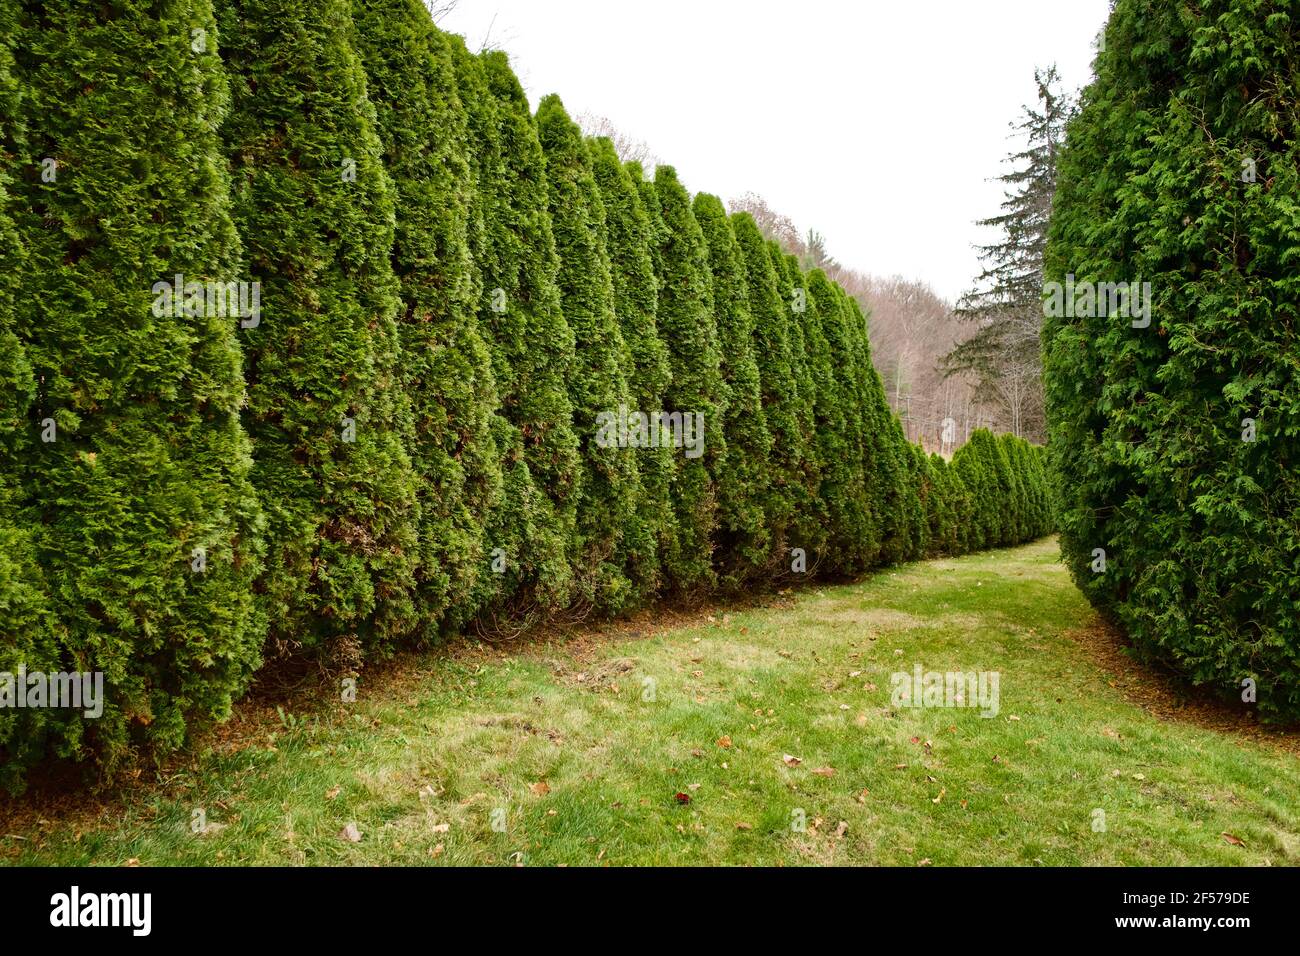 A long garden hedge of evergreen shrubs with no people. Strong perspective in this horizontal photograph Stock Photo